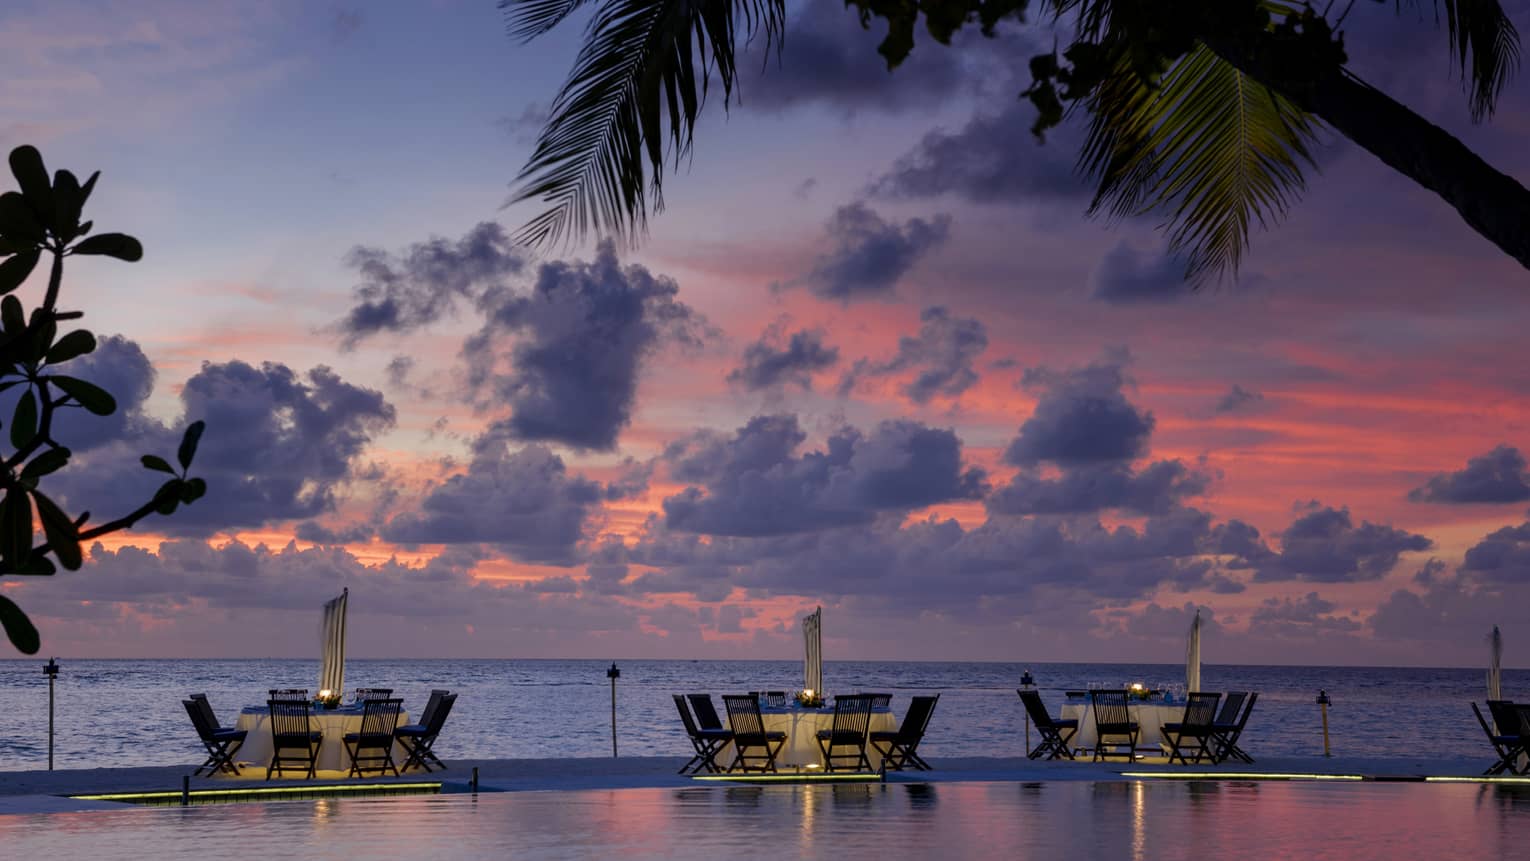 Tables with chairs between infinity pool and ocean at dusk with palm tree